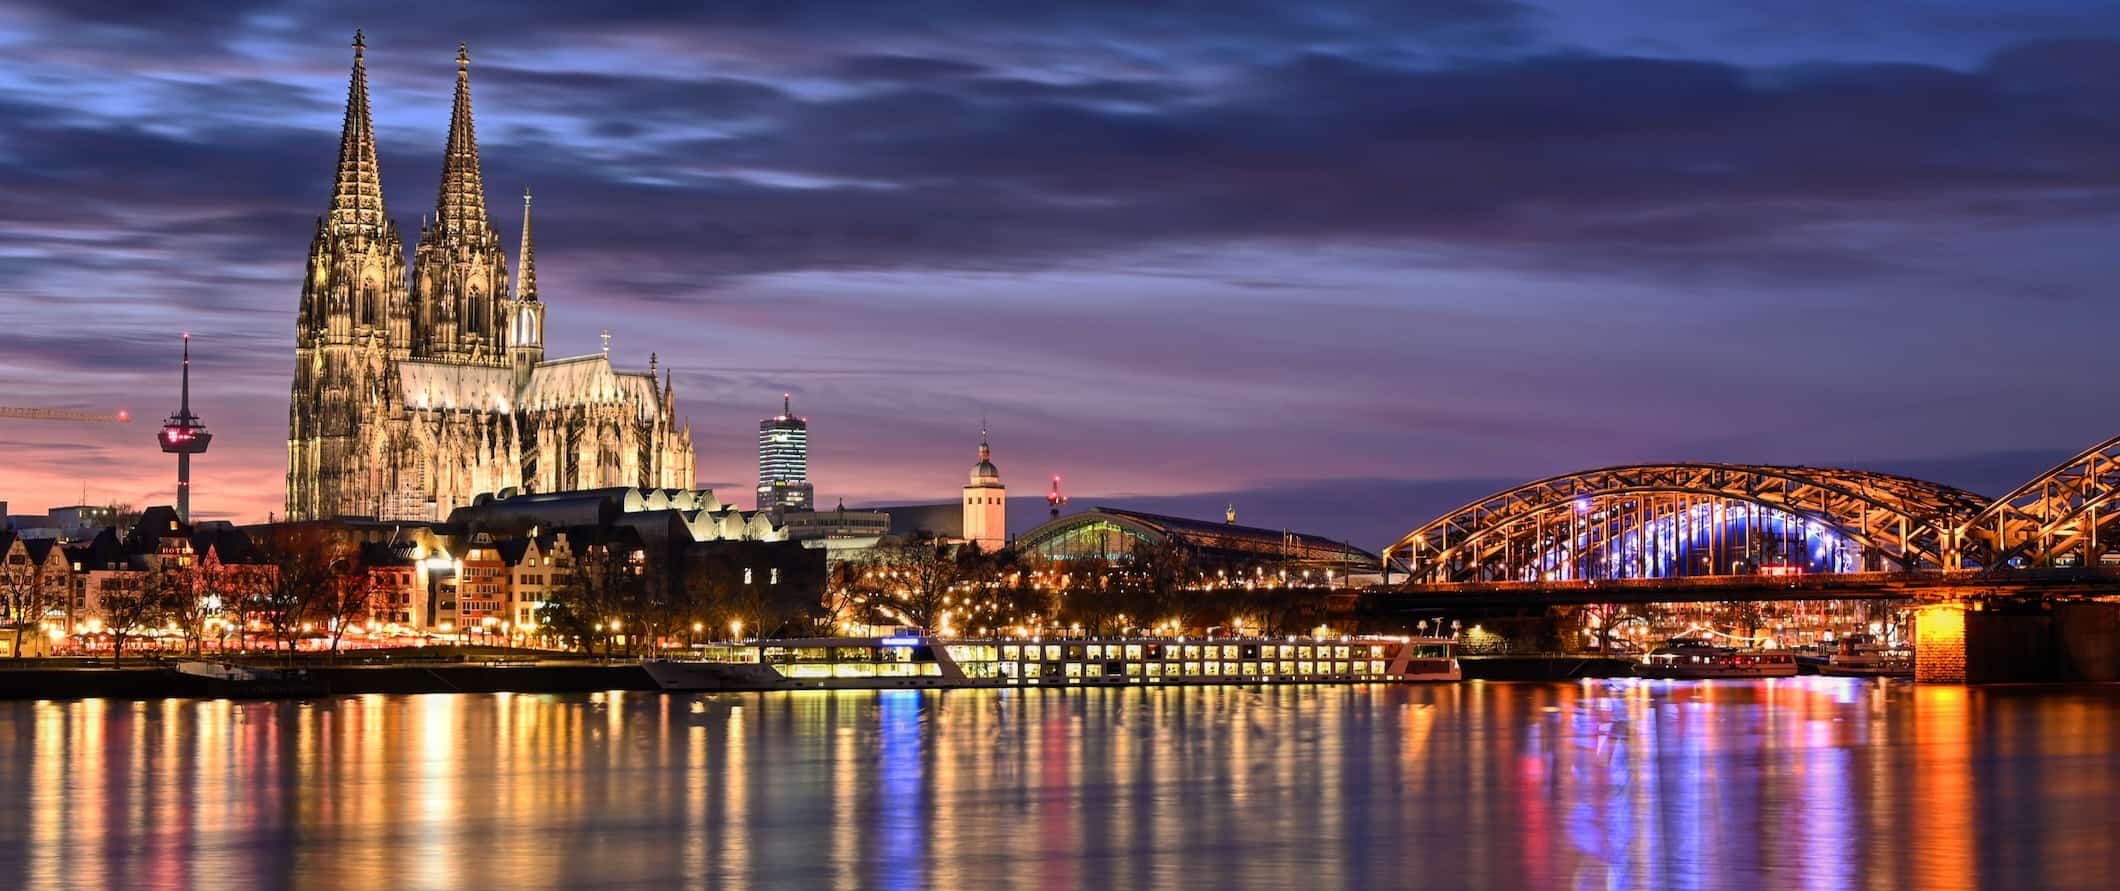 A view of the iconic cathedral and bridge lit up at night in Cologne, Germany